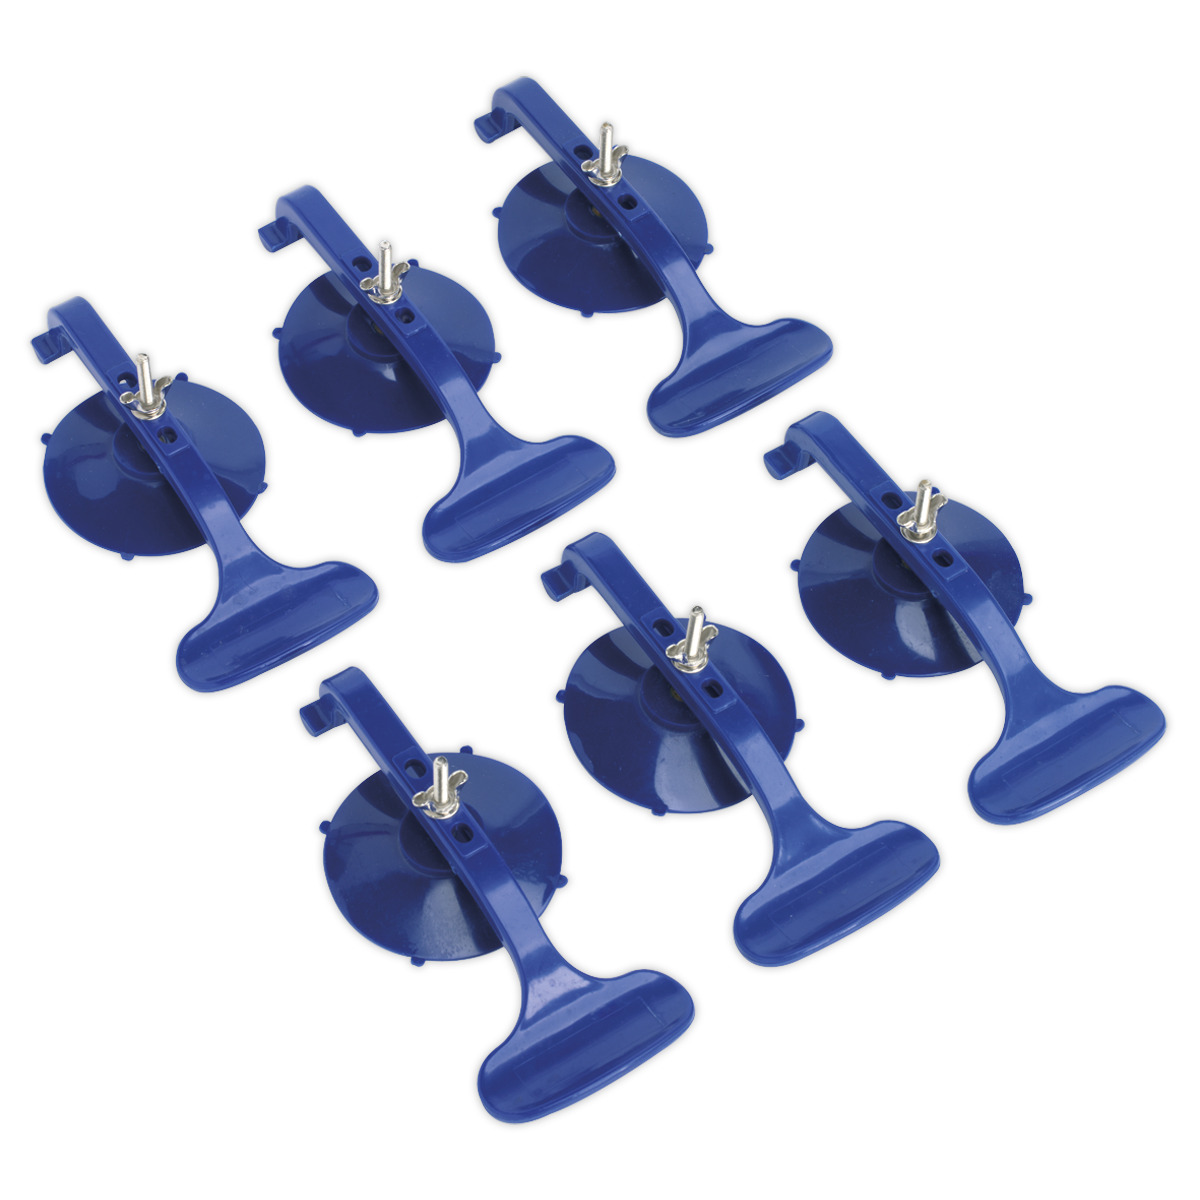 RE006 Sealey Suction Clamp Set 6pc [Preparation]